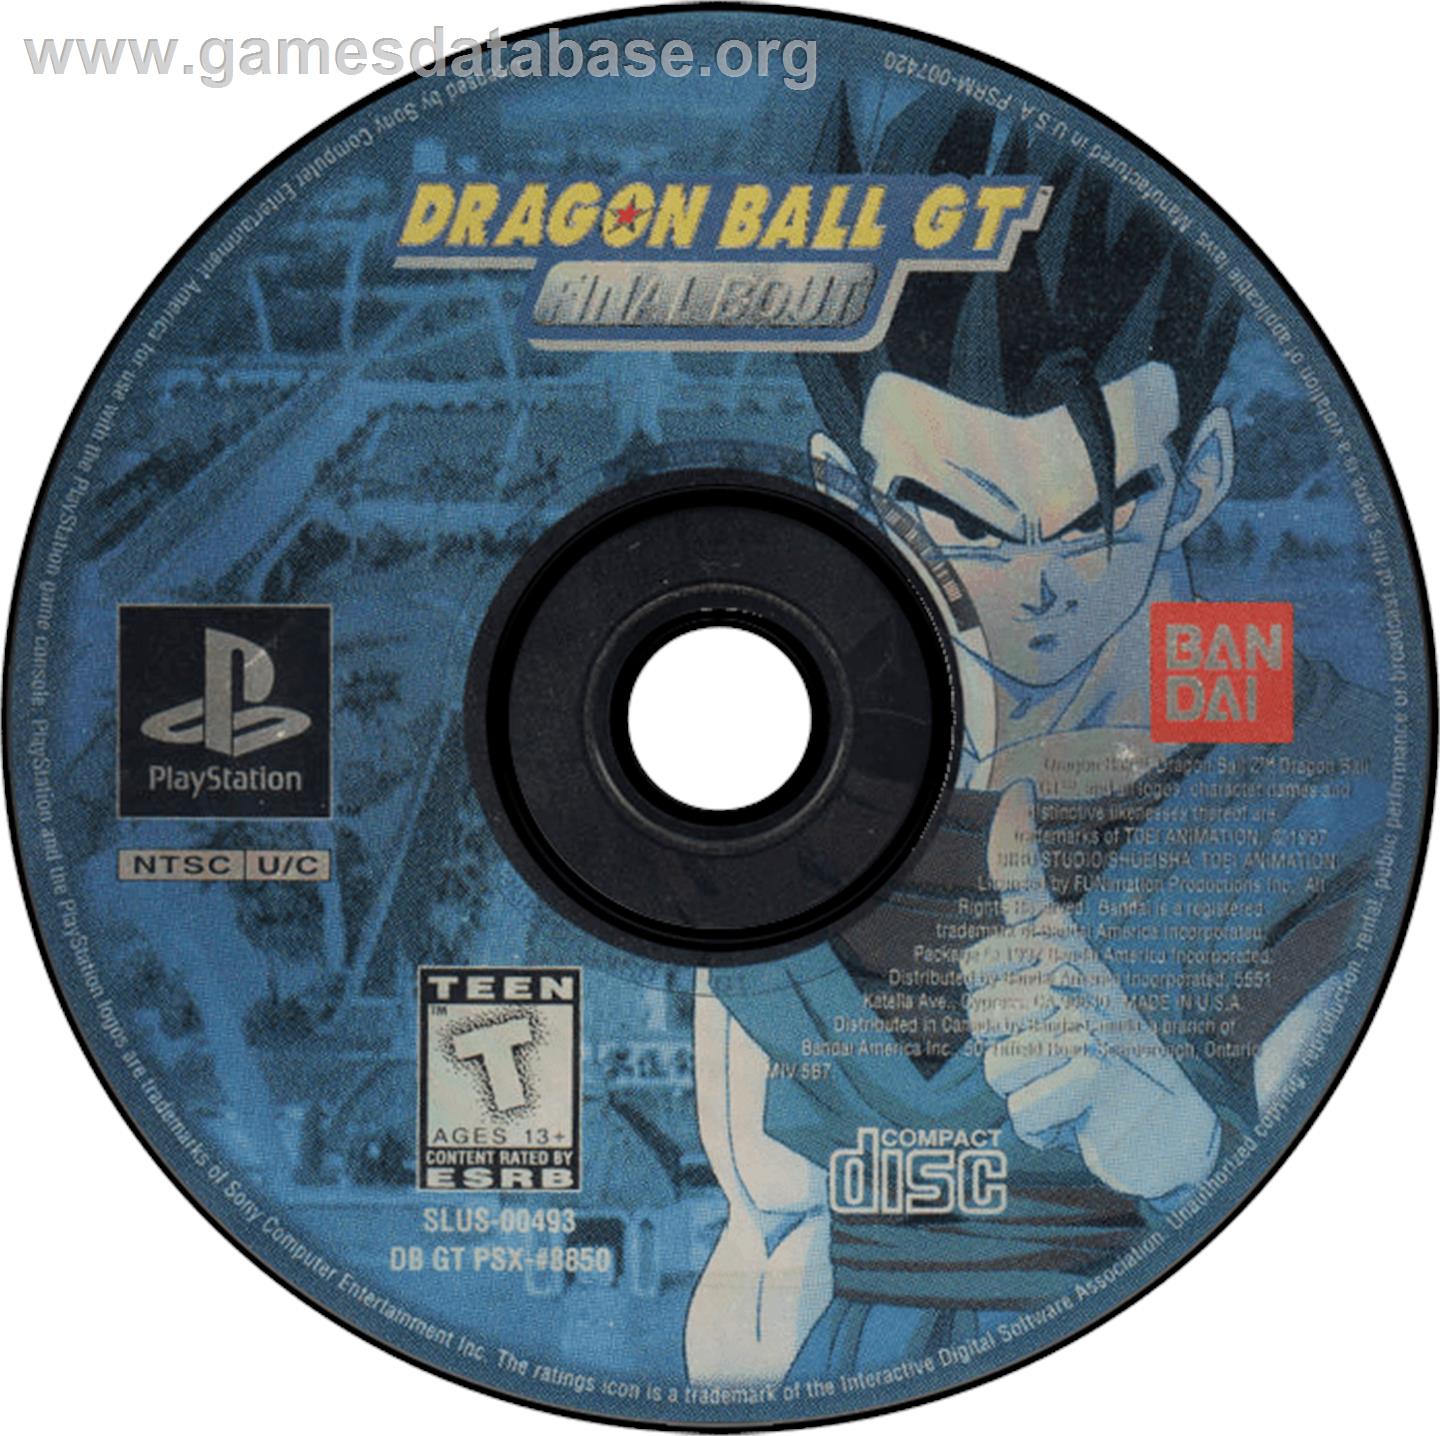 Dragon Ball GT: Final Bout - Sony Playstation - Artwork - Disc